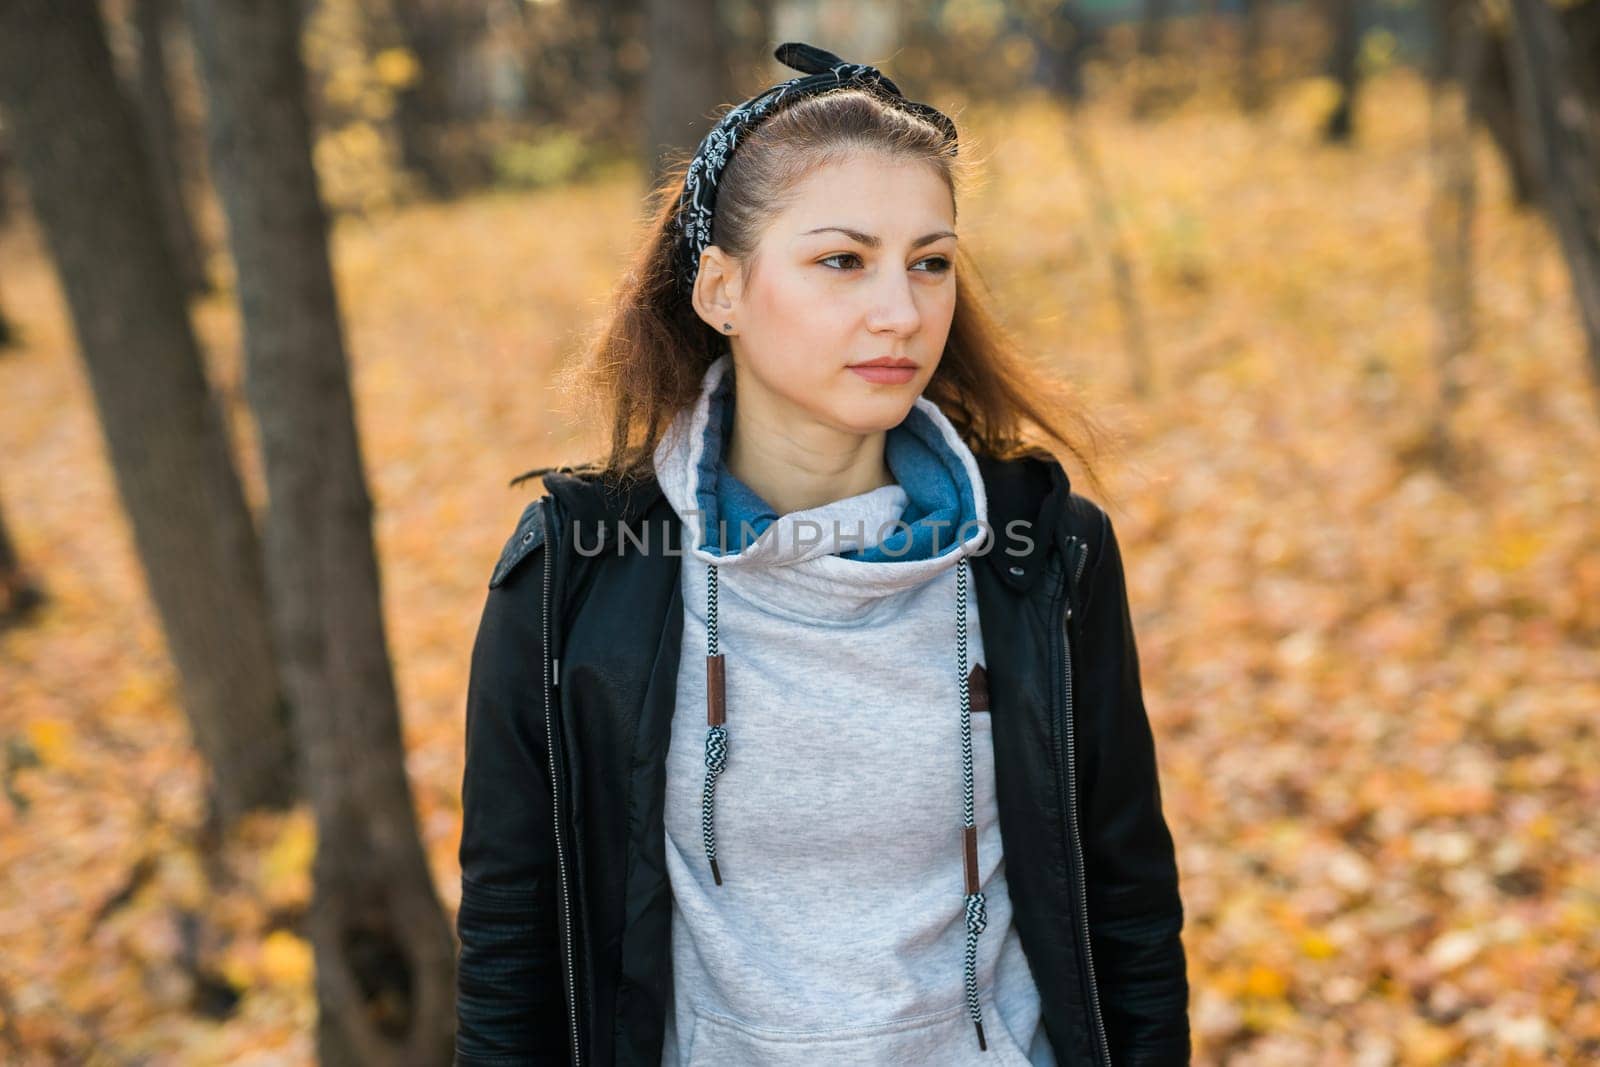 Outdoor atmospheric lifestyle portrait of young beautiful young woman. Warm autumn fall season copy space